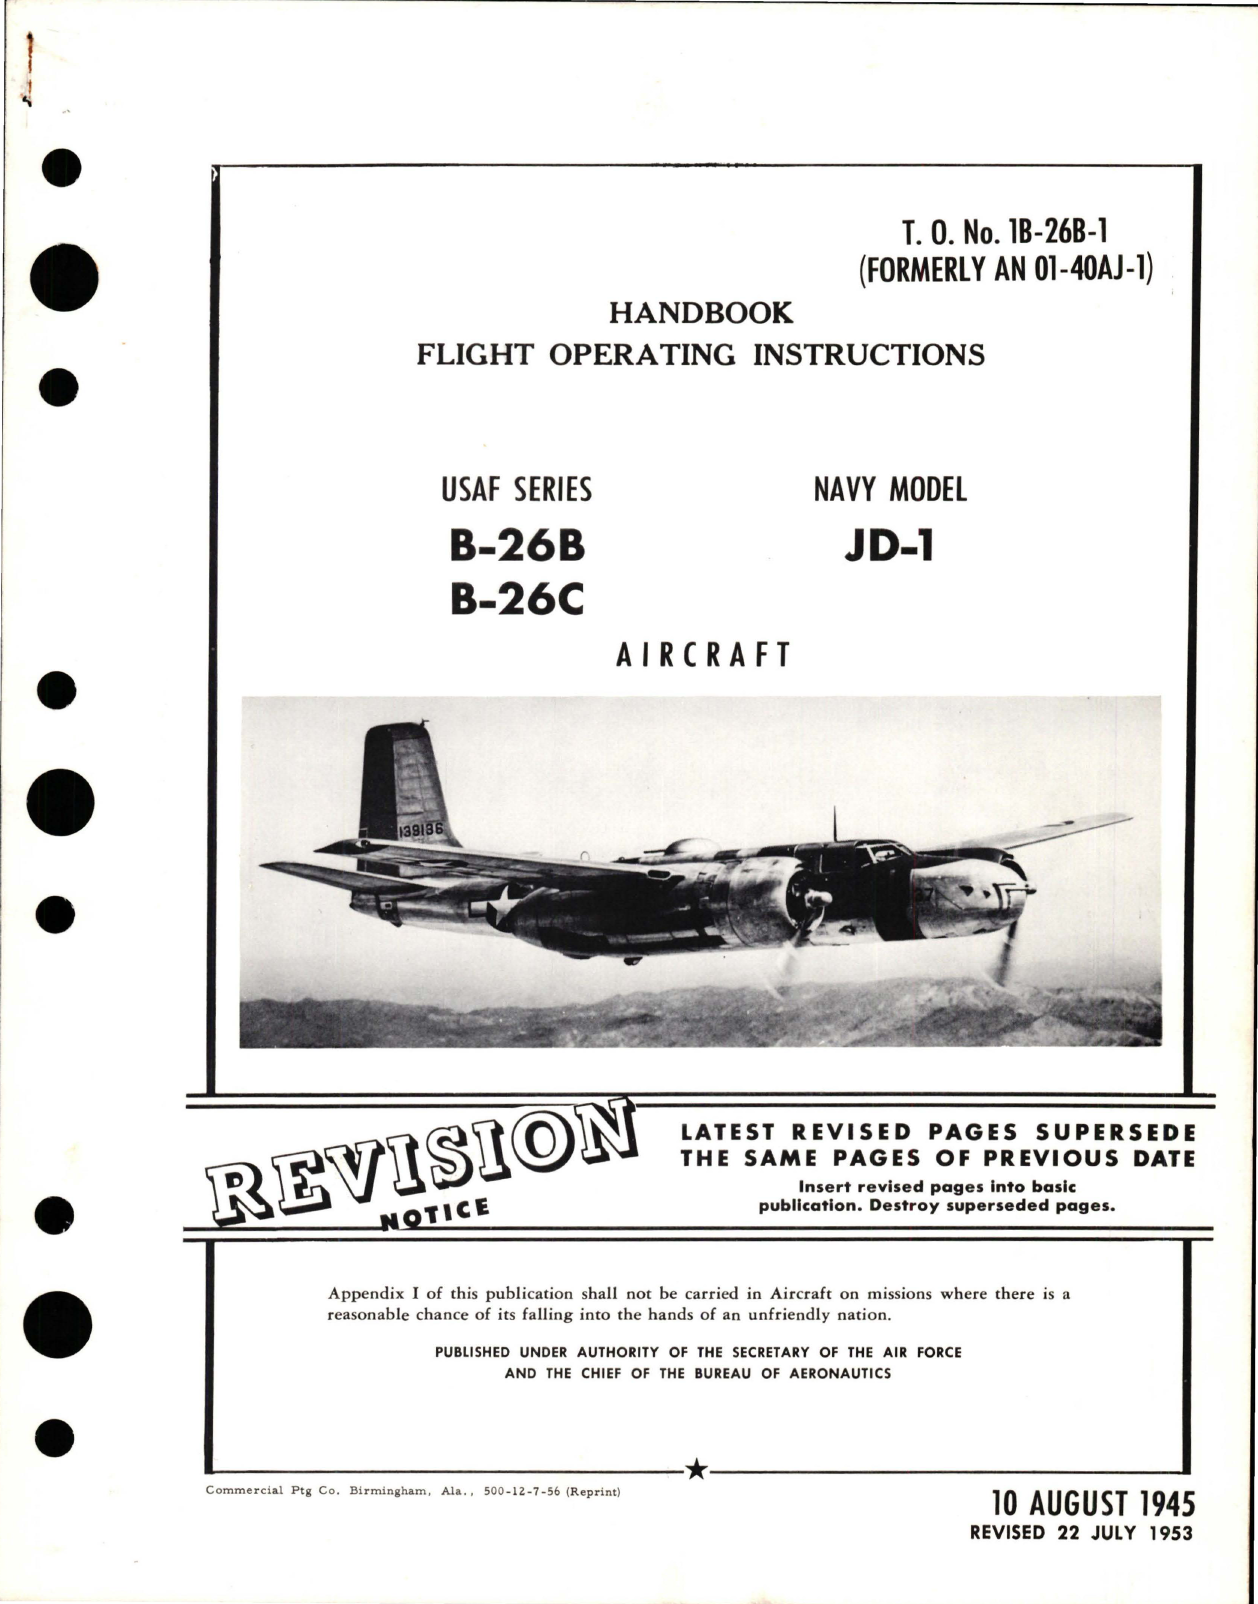 Sample page 1 from AirCorps Library document: Flight Operating Instructions for B-26B, B-26C, and JD-1